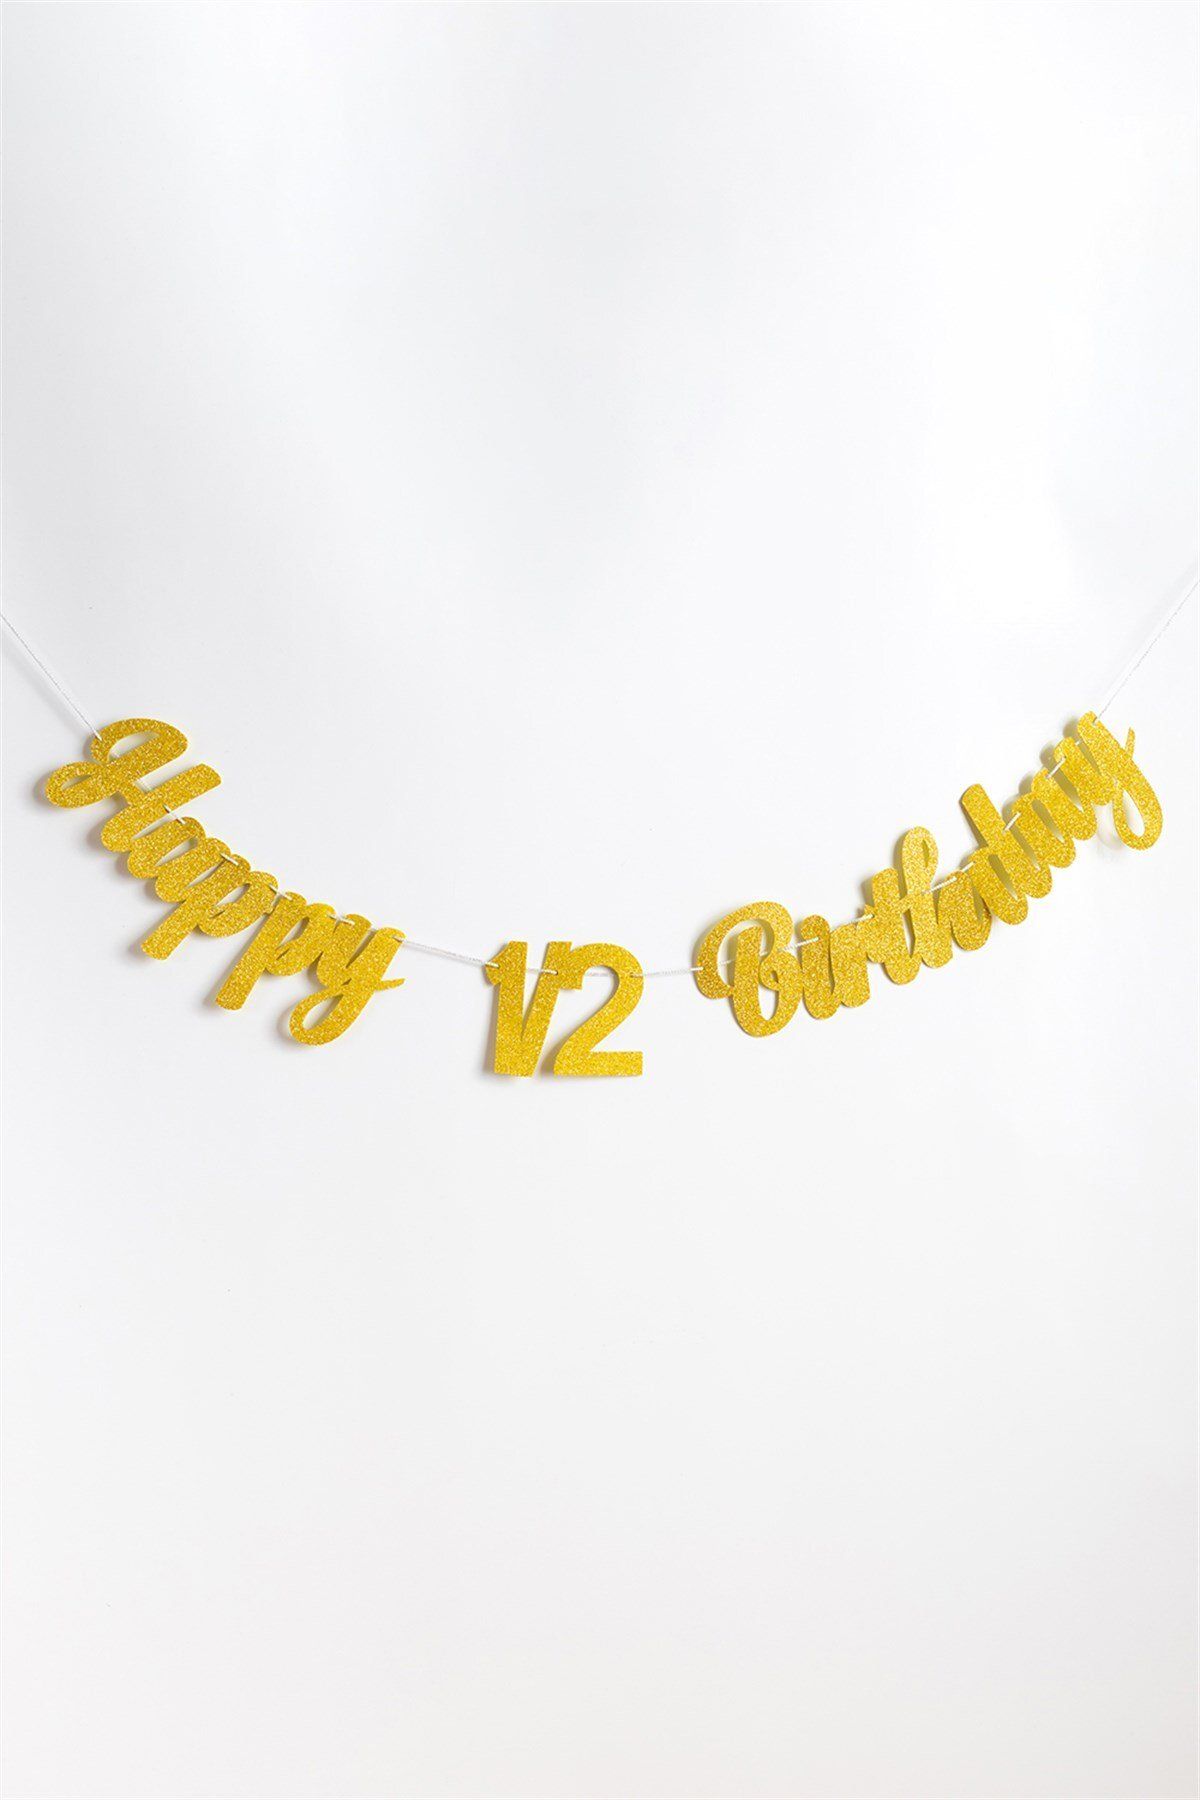 Le Mabelle Gold Happy Birthday 1/2 Banner